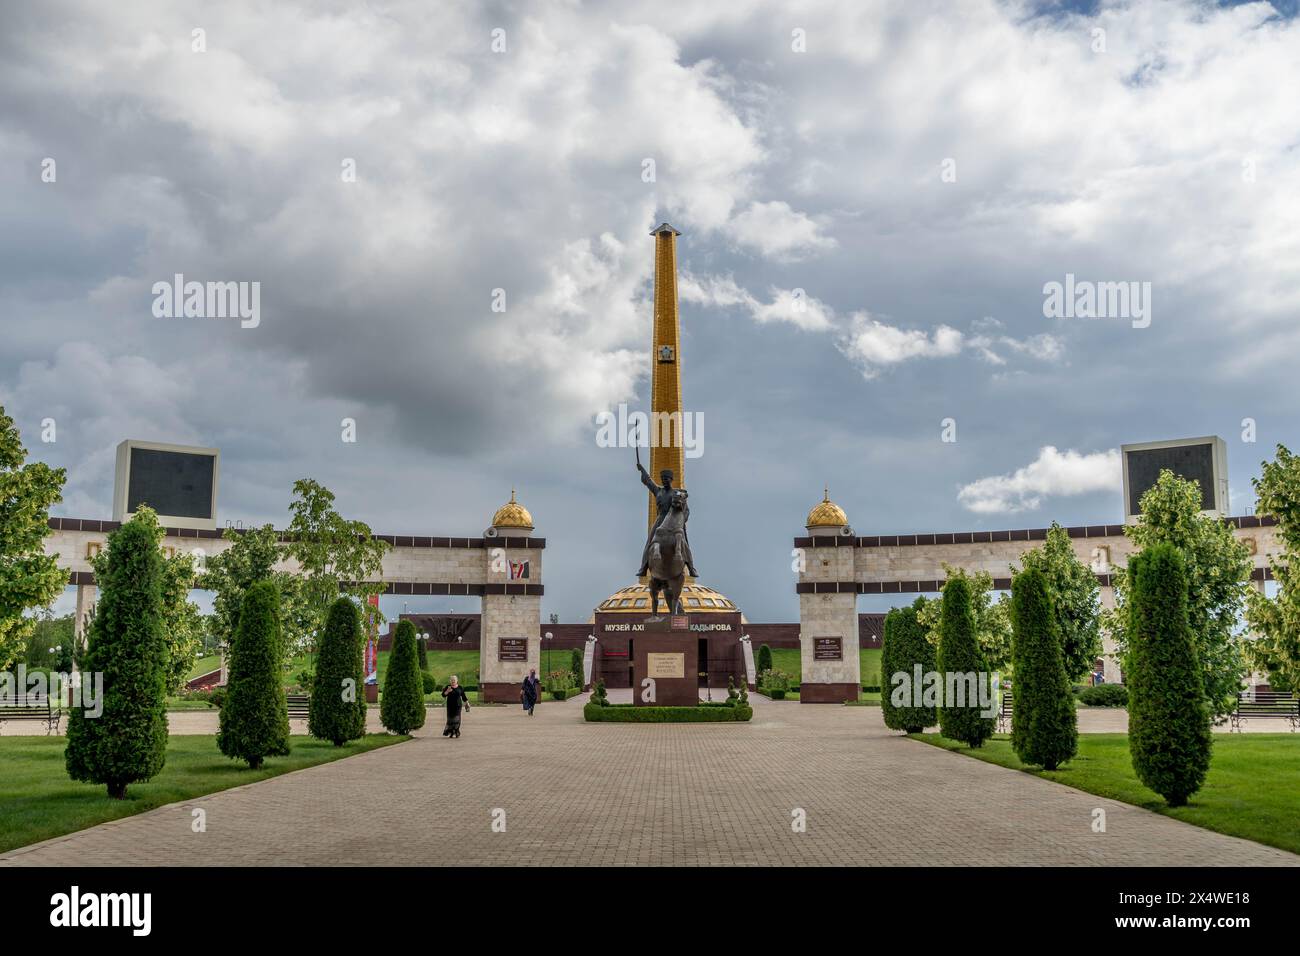 The memorial park close to the museum of Chechen Republic ex-president Akhmad Kadyrov in Grozny, Republic of Chechnya, Russia. Stock Photo